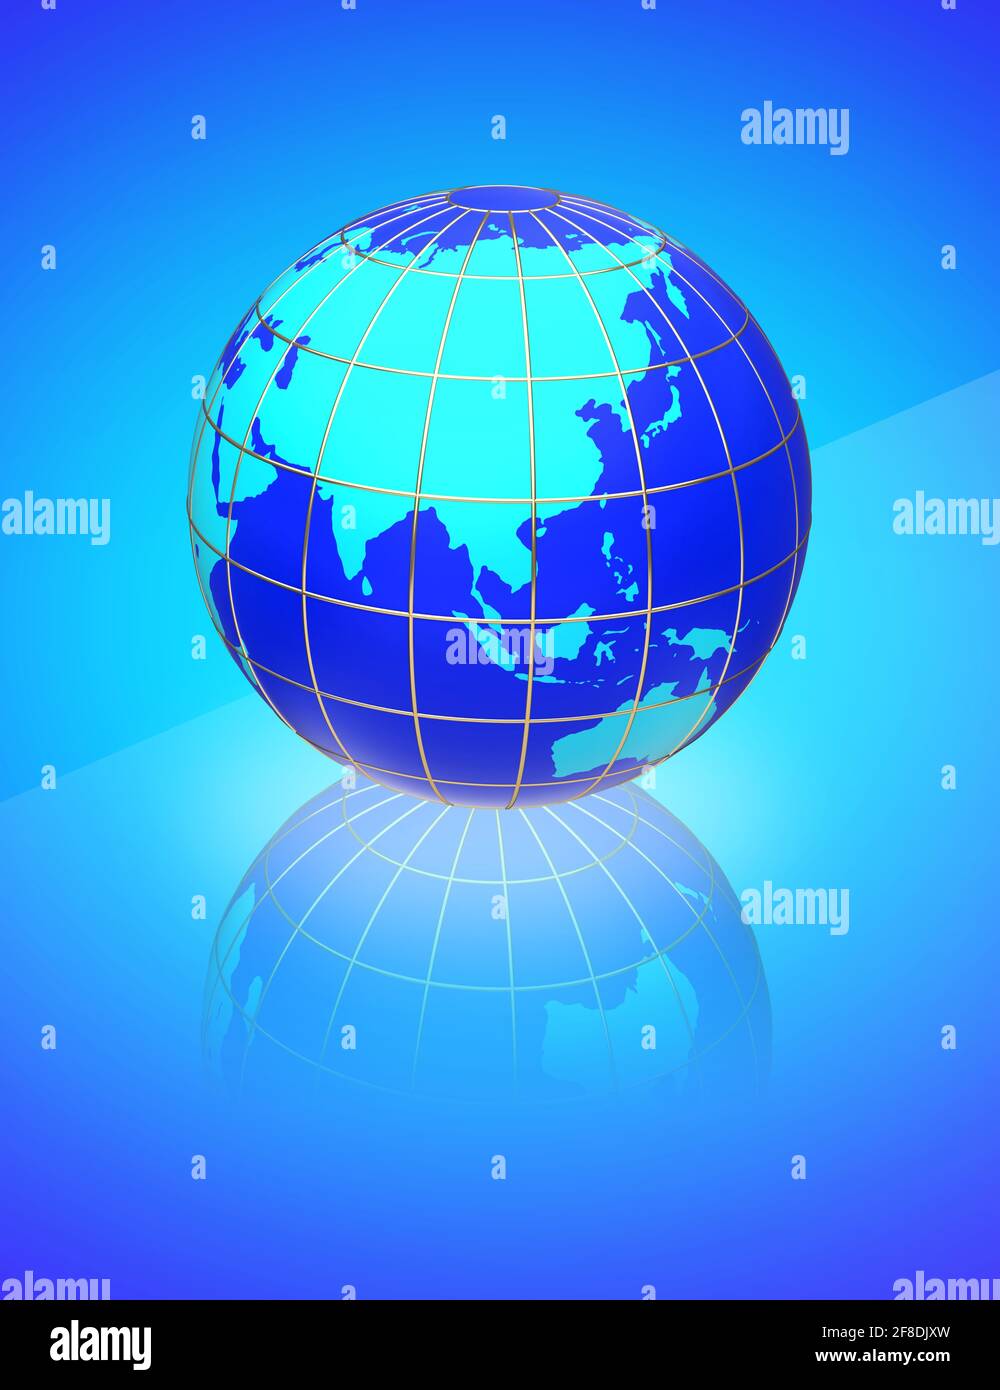 Earth globe map on a blue background. Side of Asia, Australia and Indonesia. Stock Photo